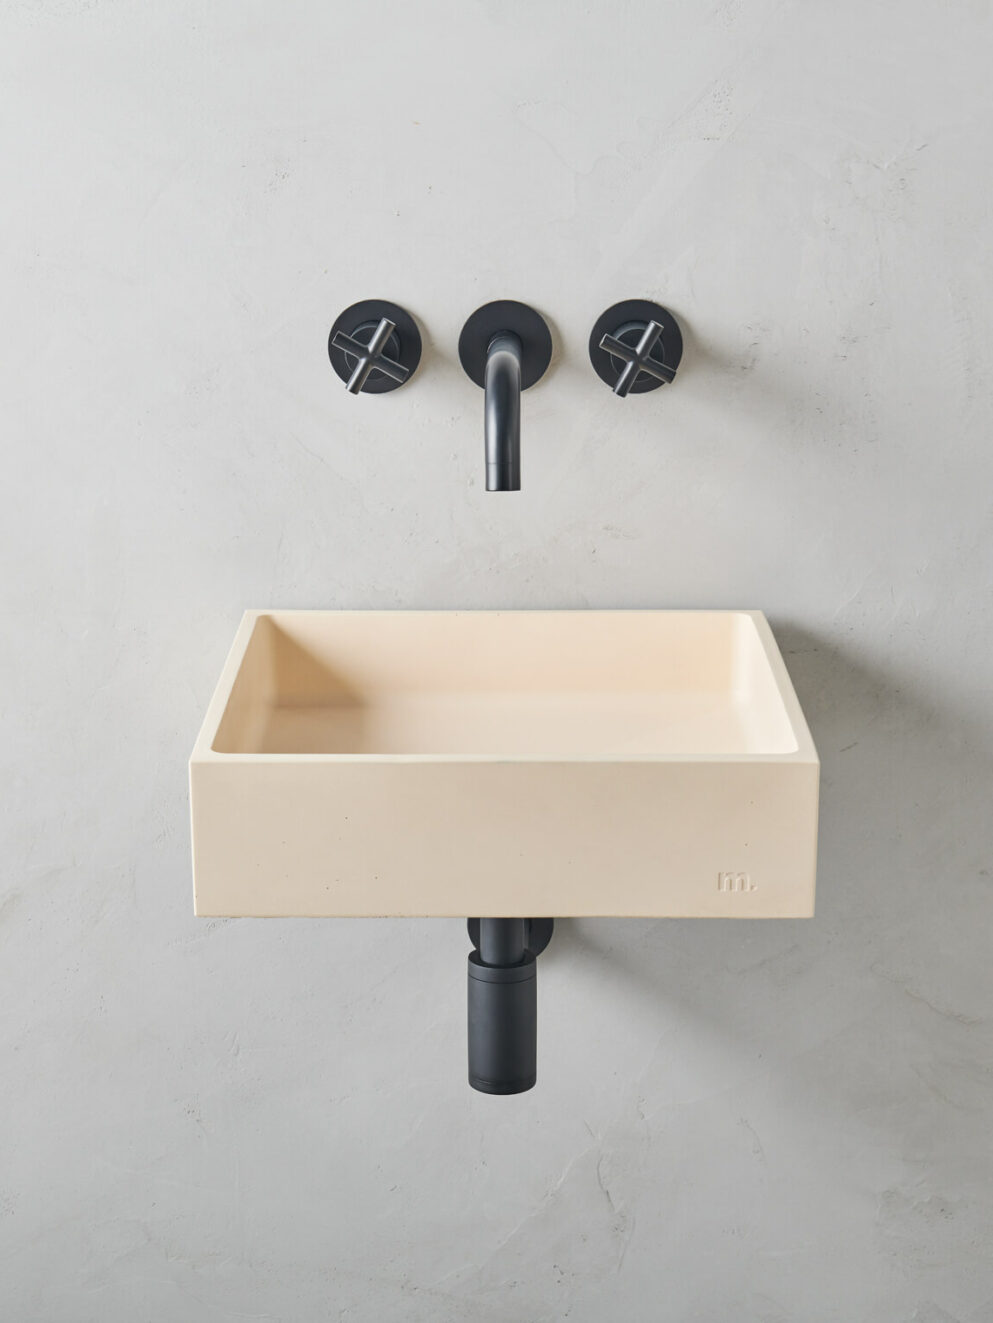 mudd concrete Yarra LG Affix in the colour peache in a microcement bathroom setting with black hardware